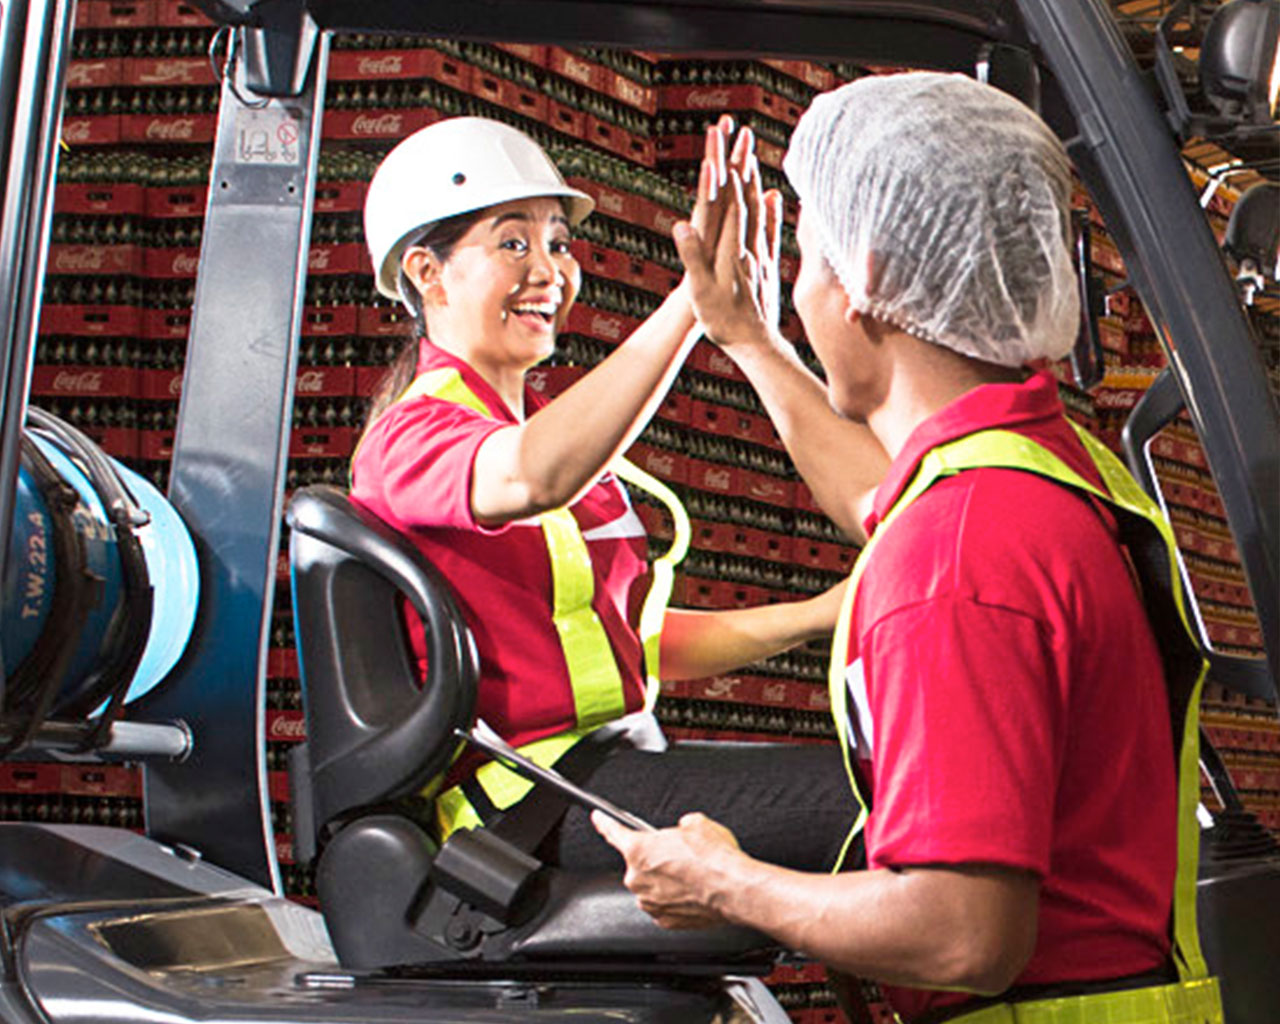 Two employees doing a high five inside a distribution center